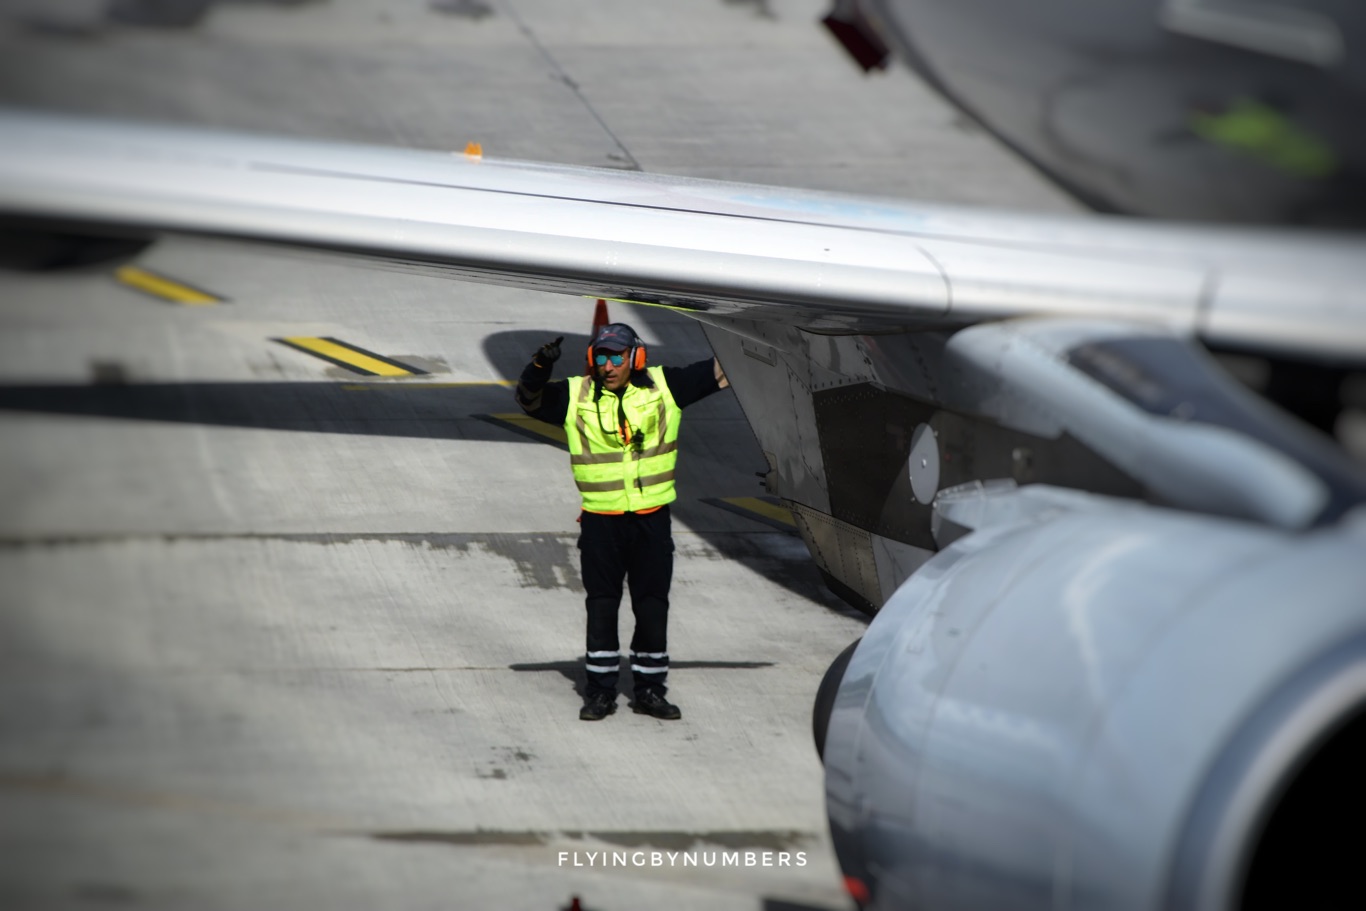 Staff on apron wearing high vis jacket and ear protection